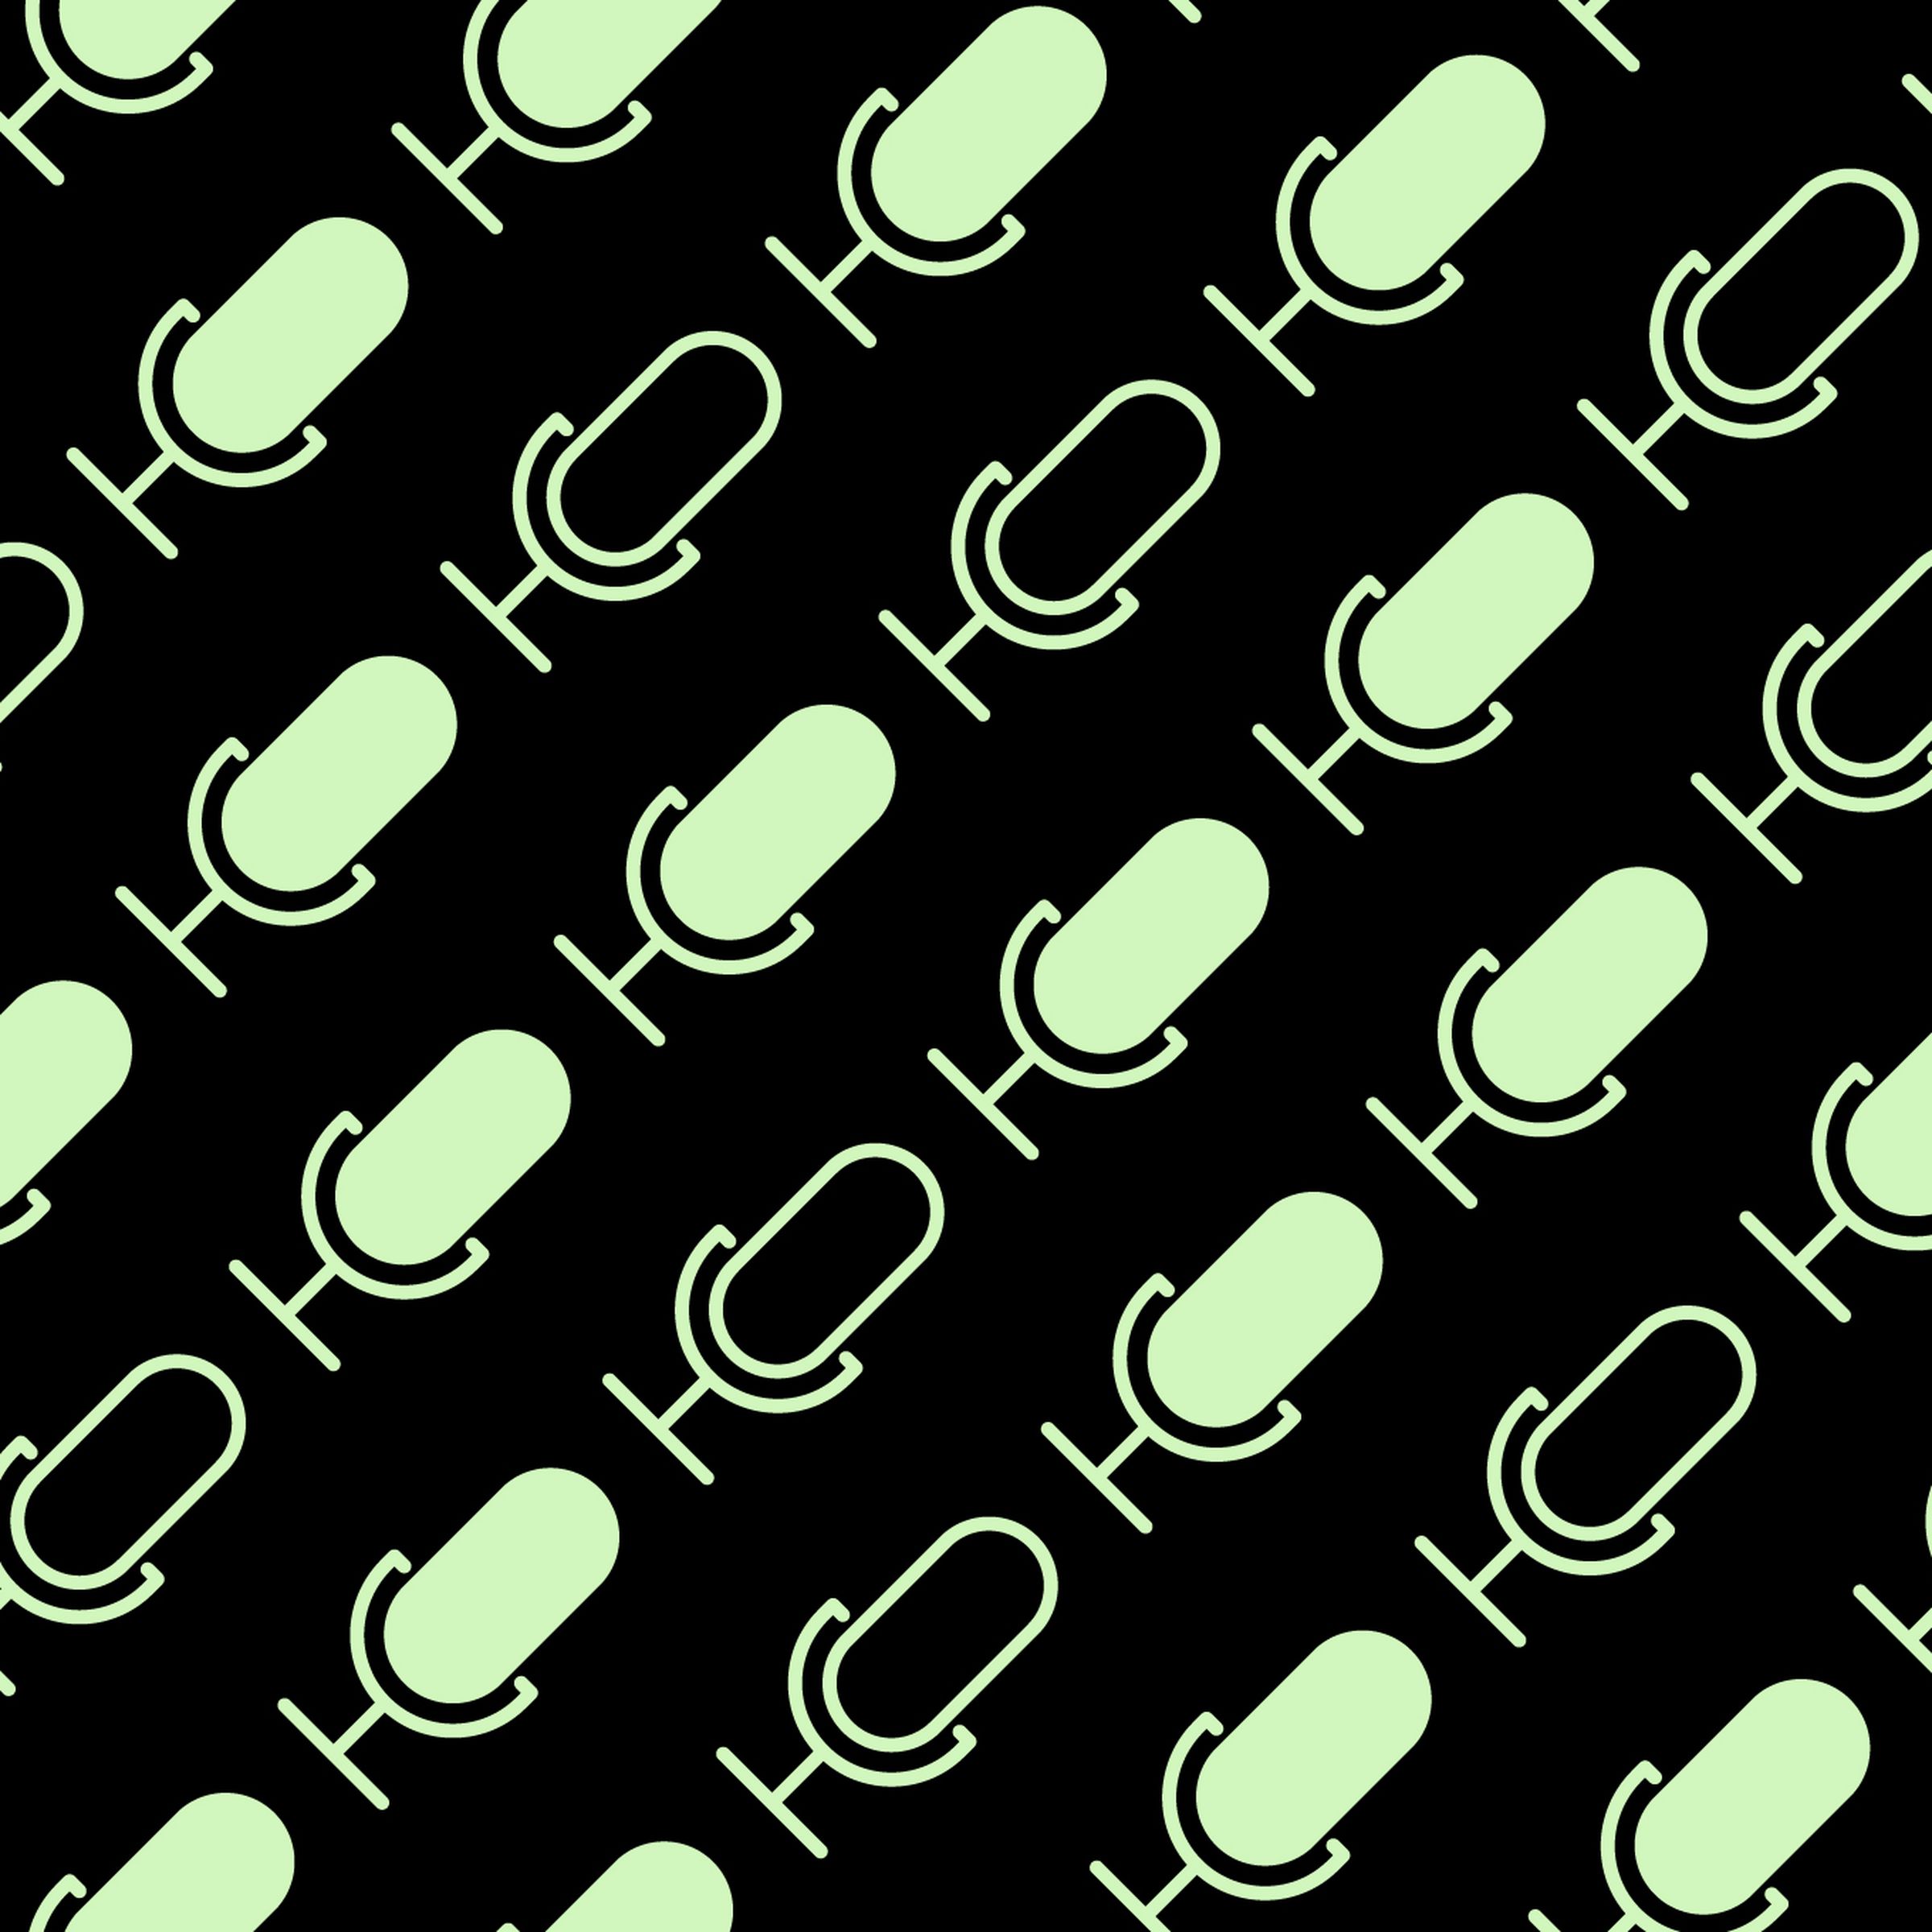 Repeating green microphones over a black background